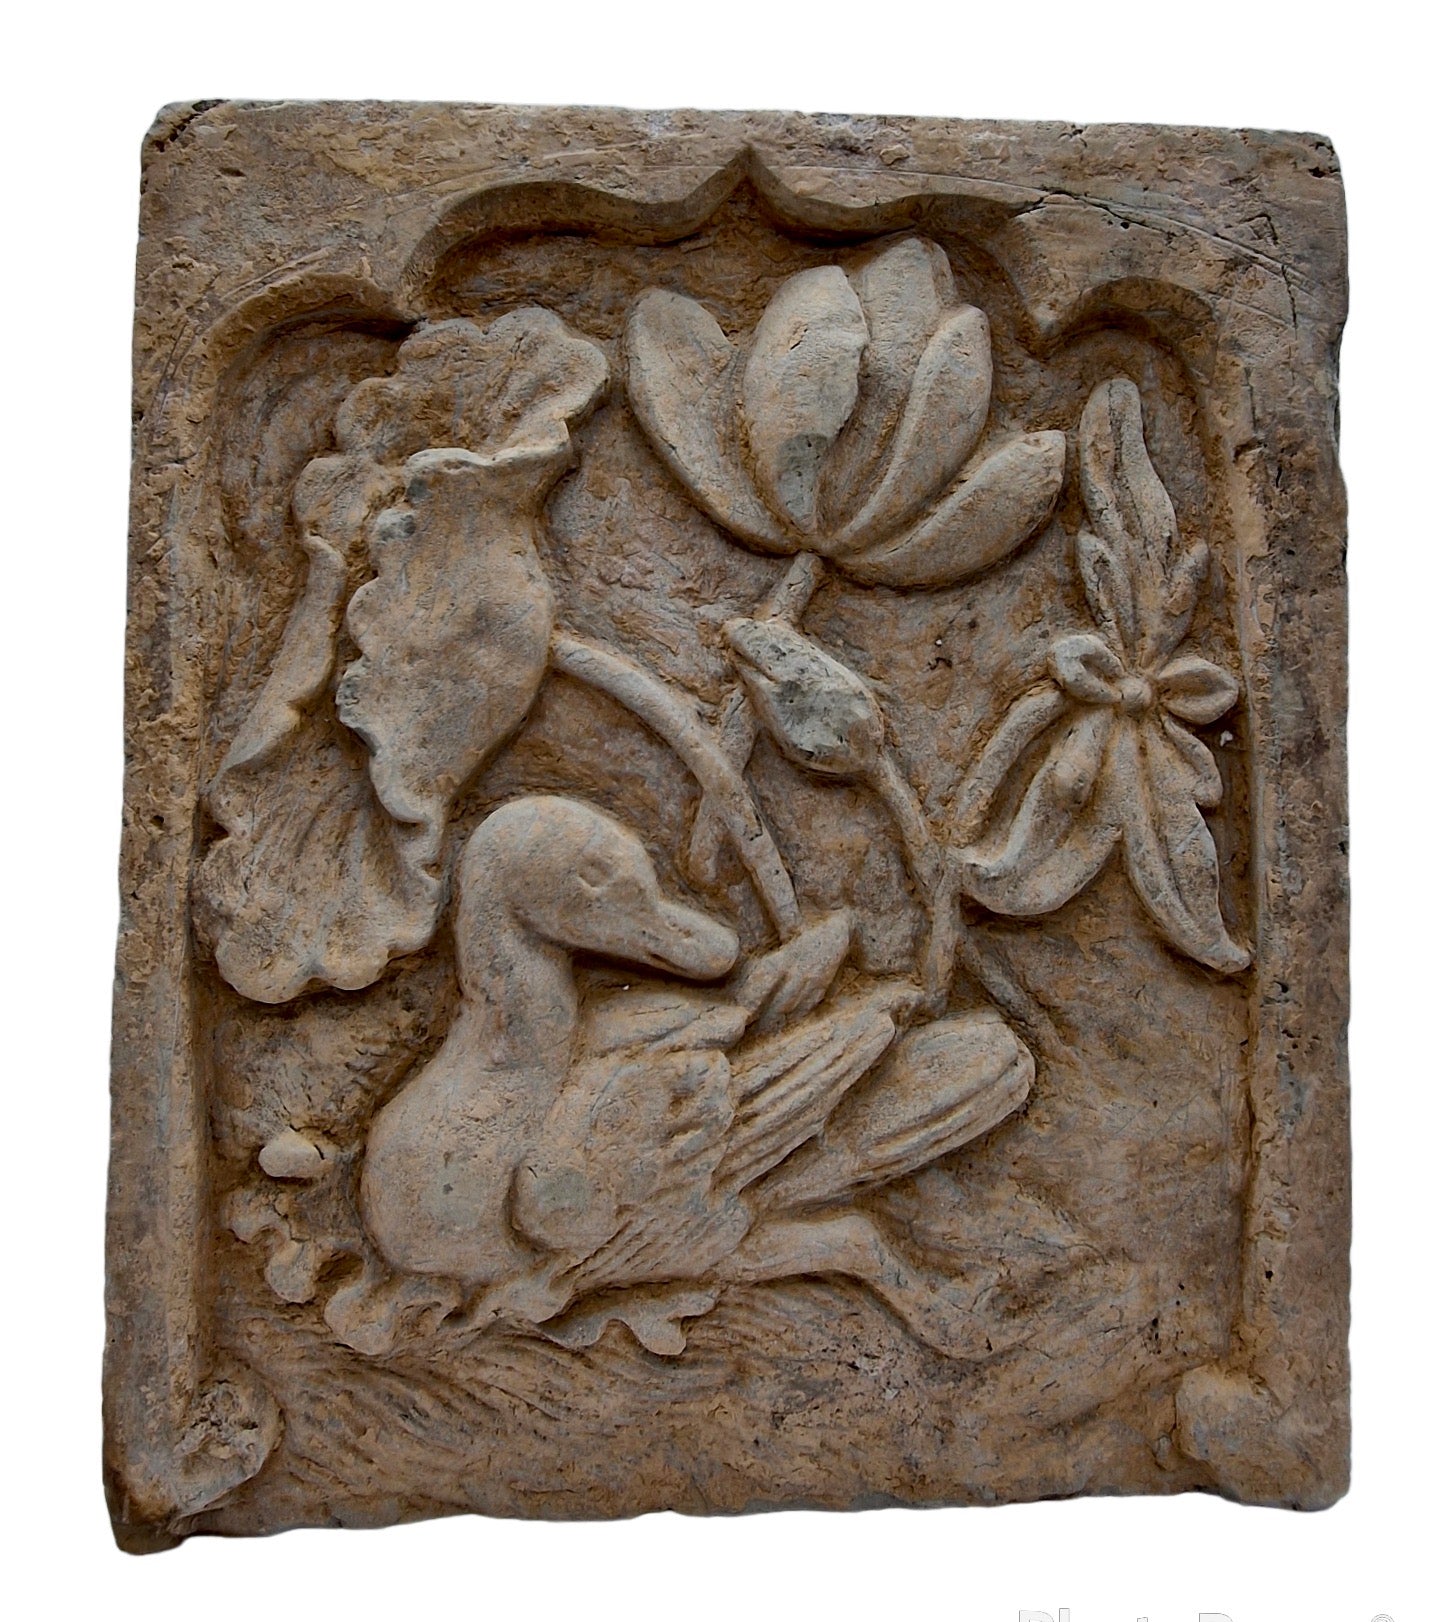 Terracotta Tile - Song Dynasty - China - 960-1279 A.D.